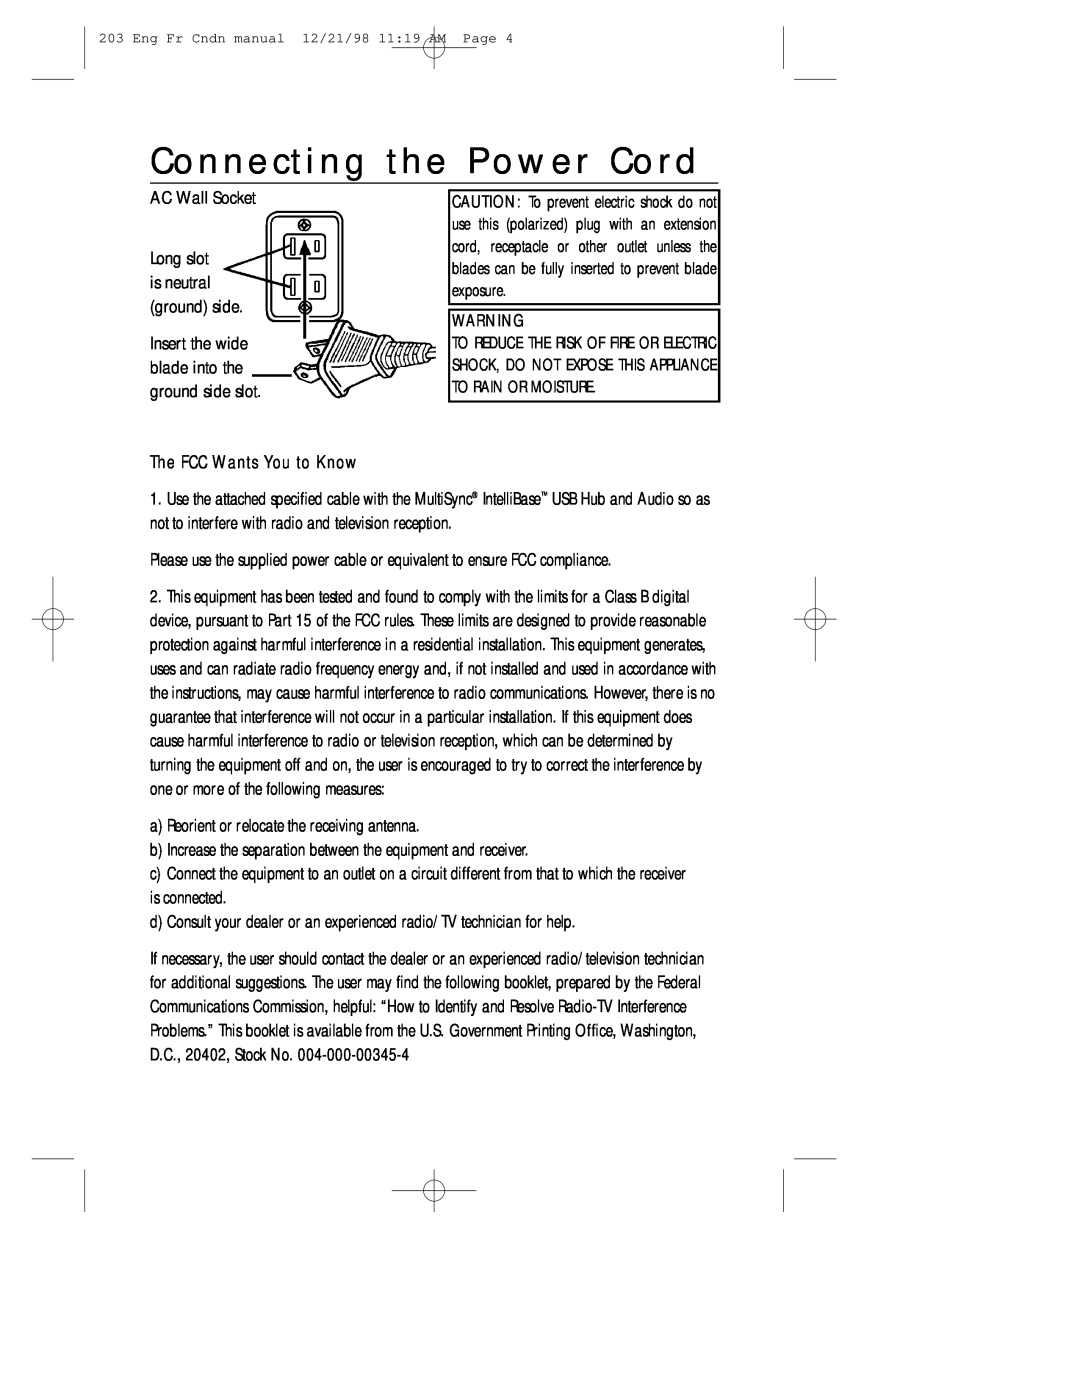 NEC USB user manual Connecting the Power Cord, The FCC Wants You to Know 